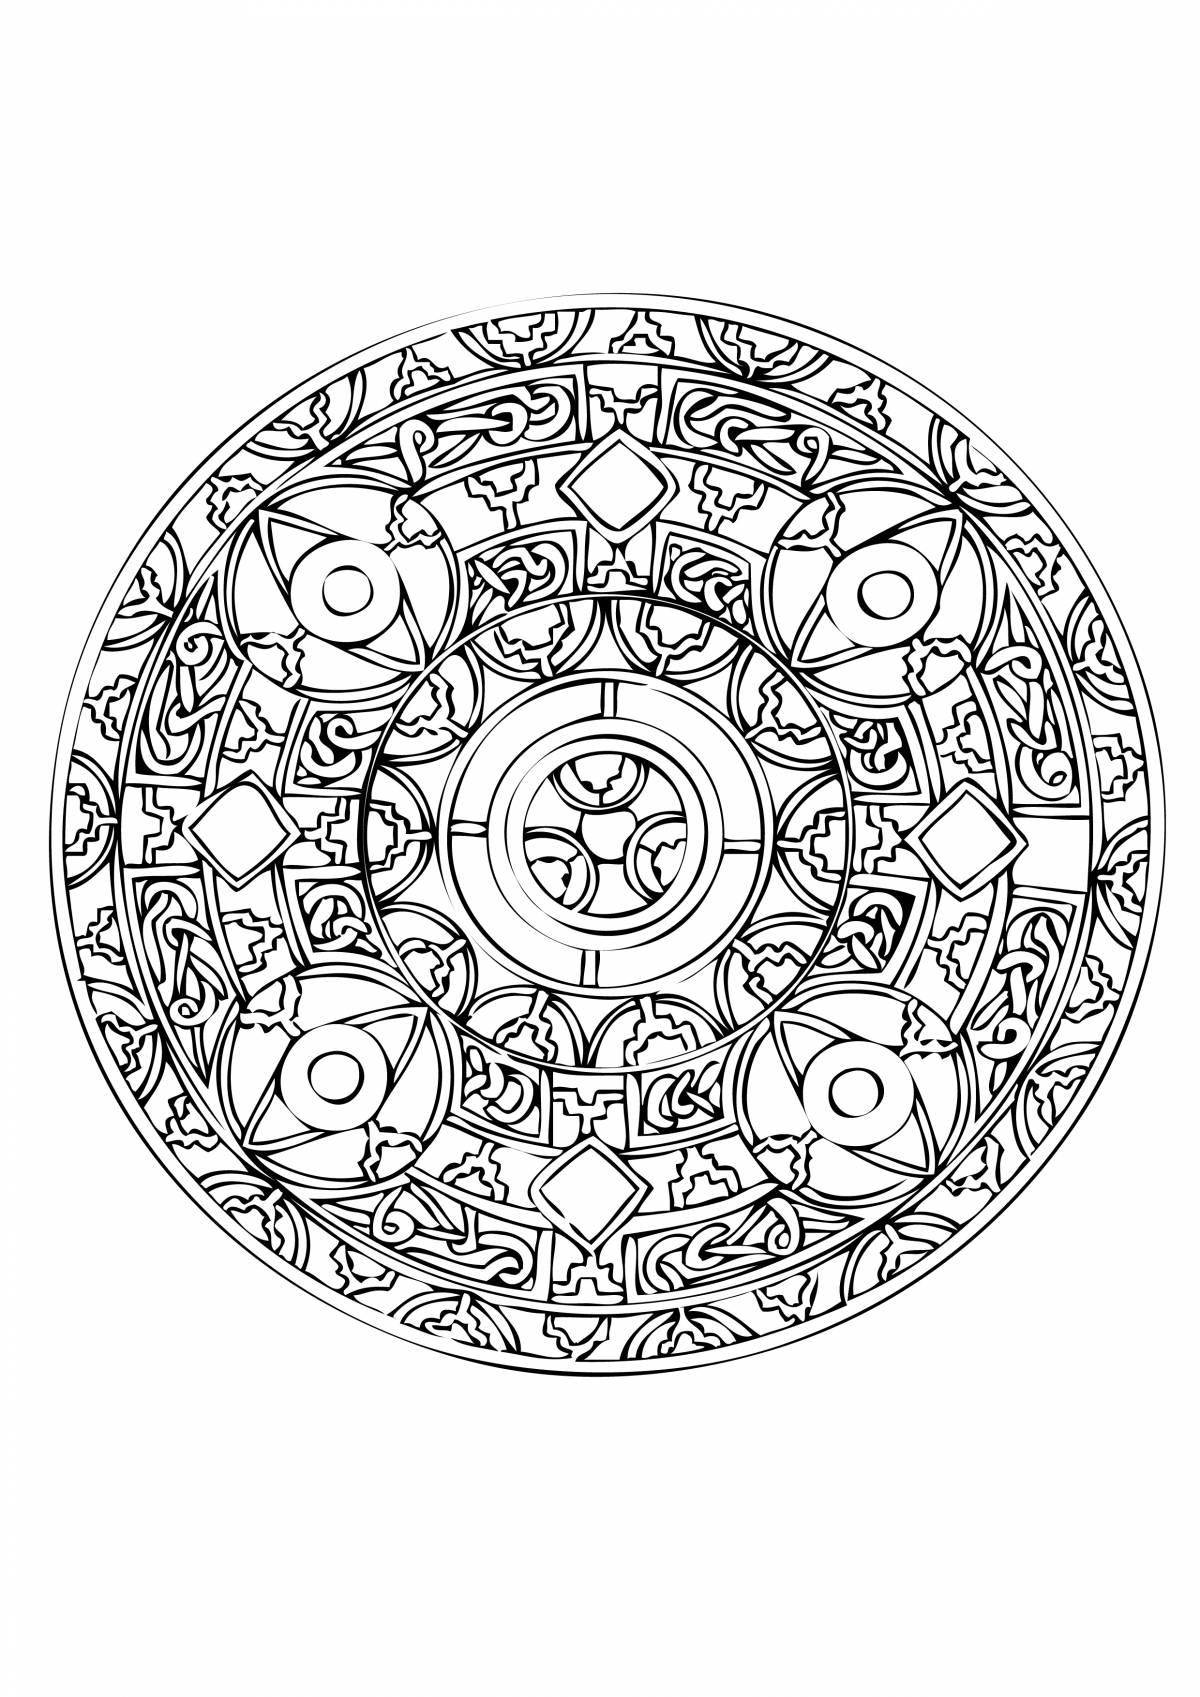 Coloring page with stylish circular pattern